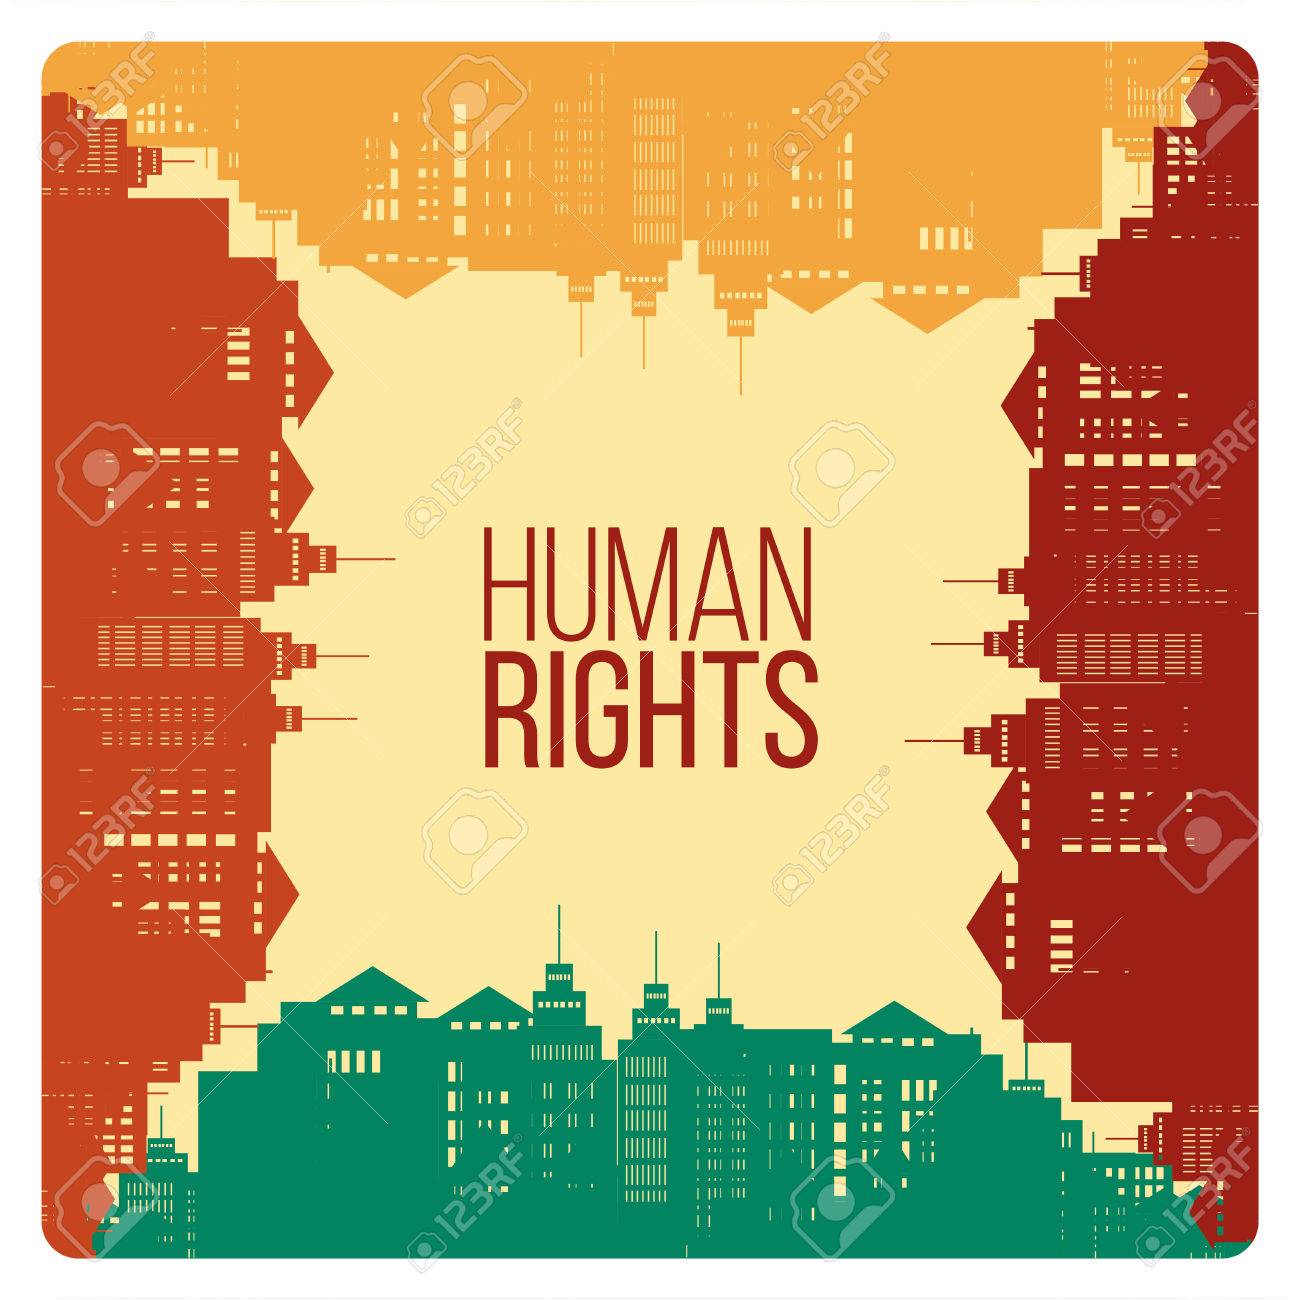 Human Rights Design Over Yellow Color Background Royalty